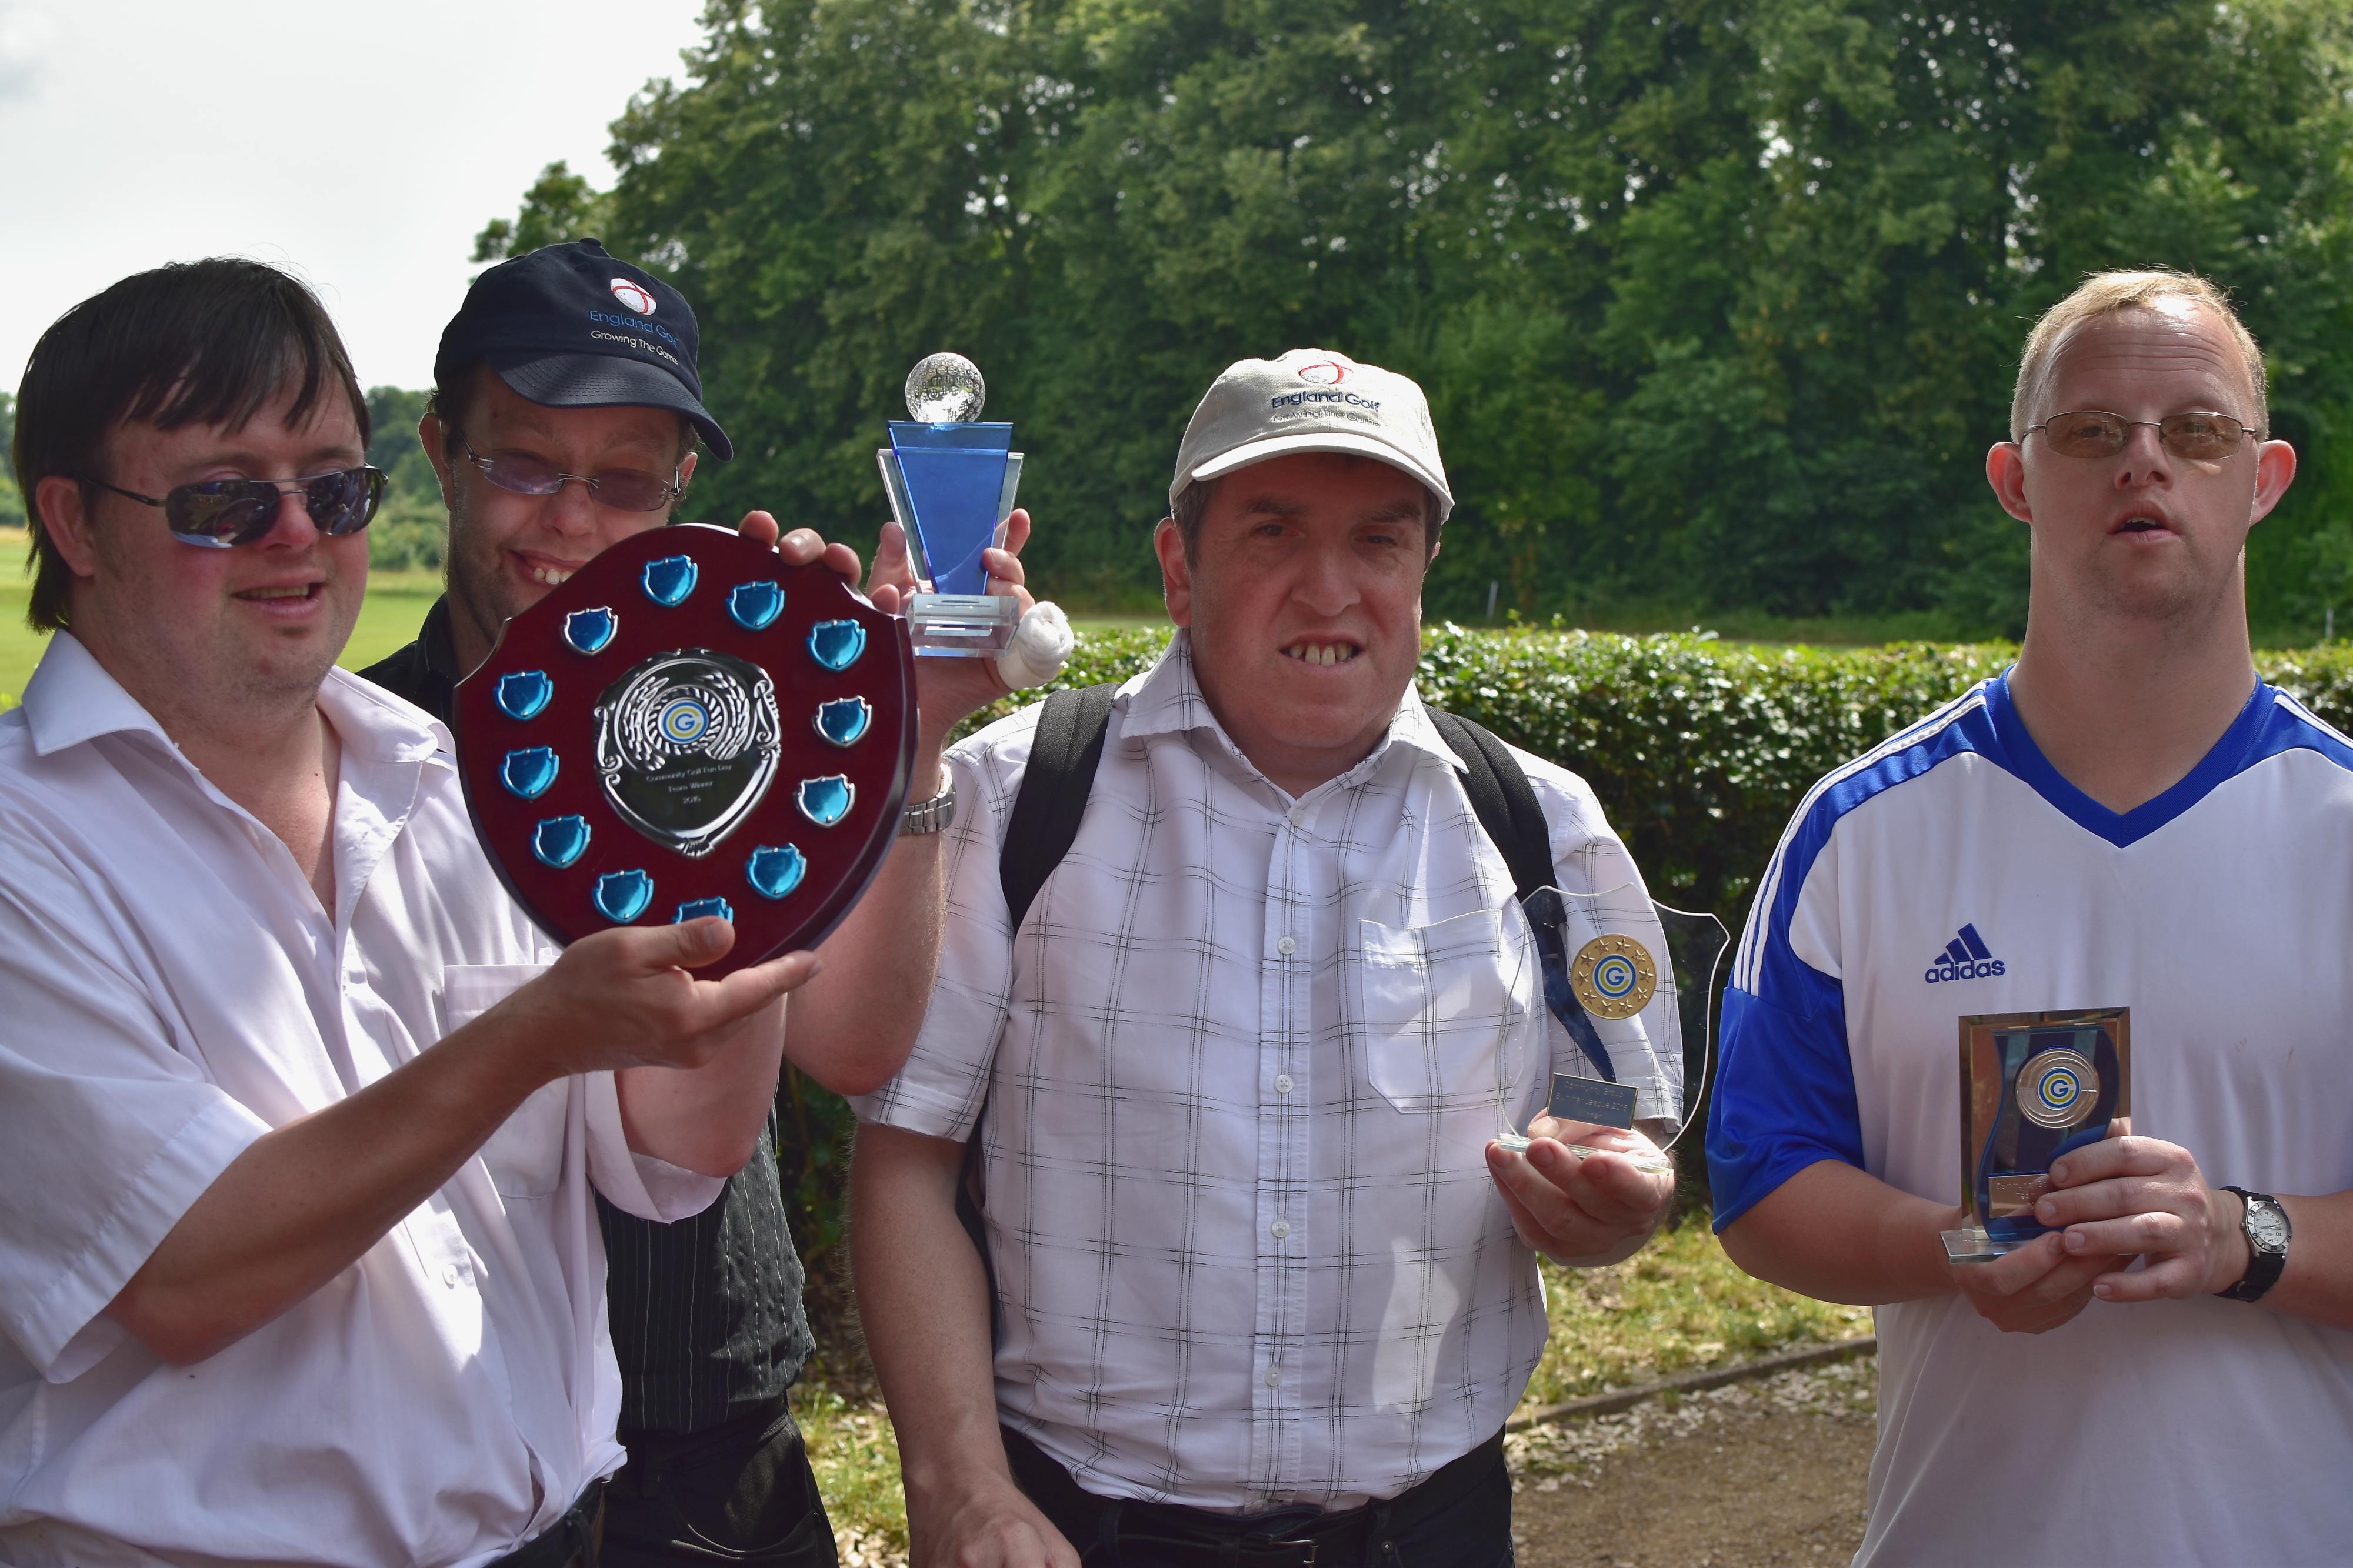 Dorking Community Group Team holding the winning trophy